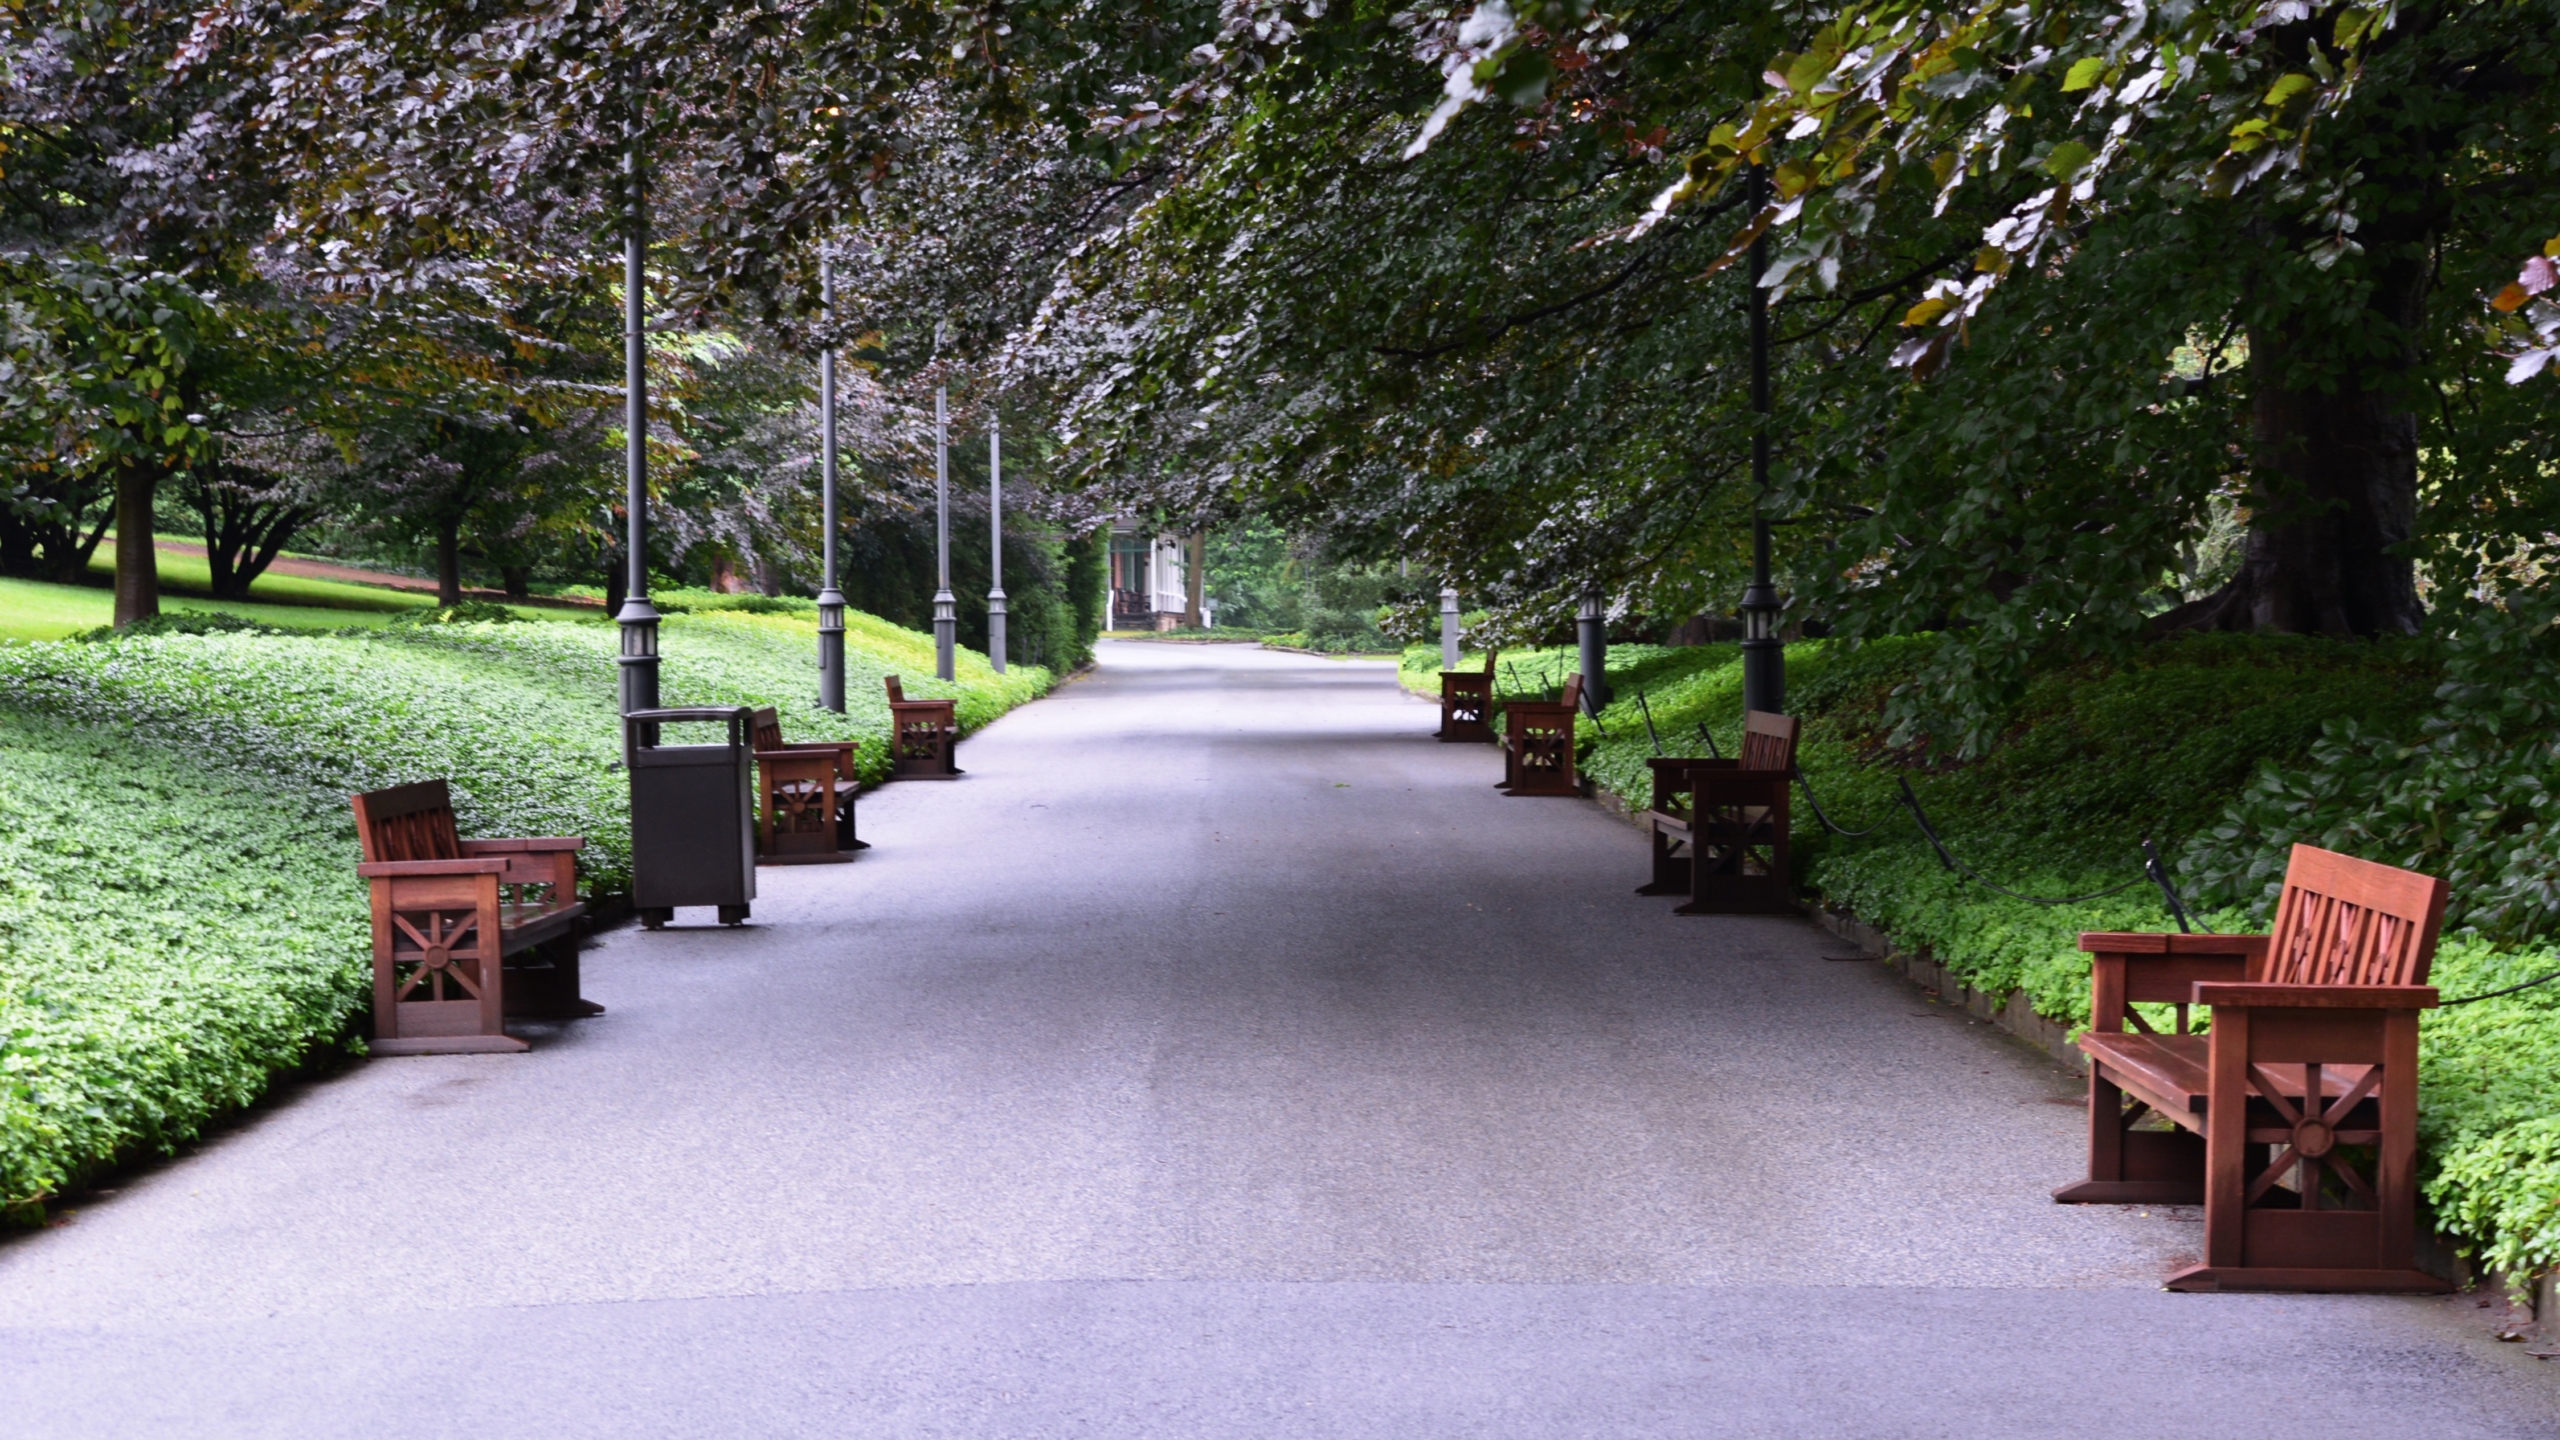 tree lined pathway with wooden benches spaced evenly along the sides, a place for thoughts about an uncertain future